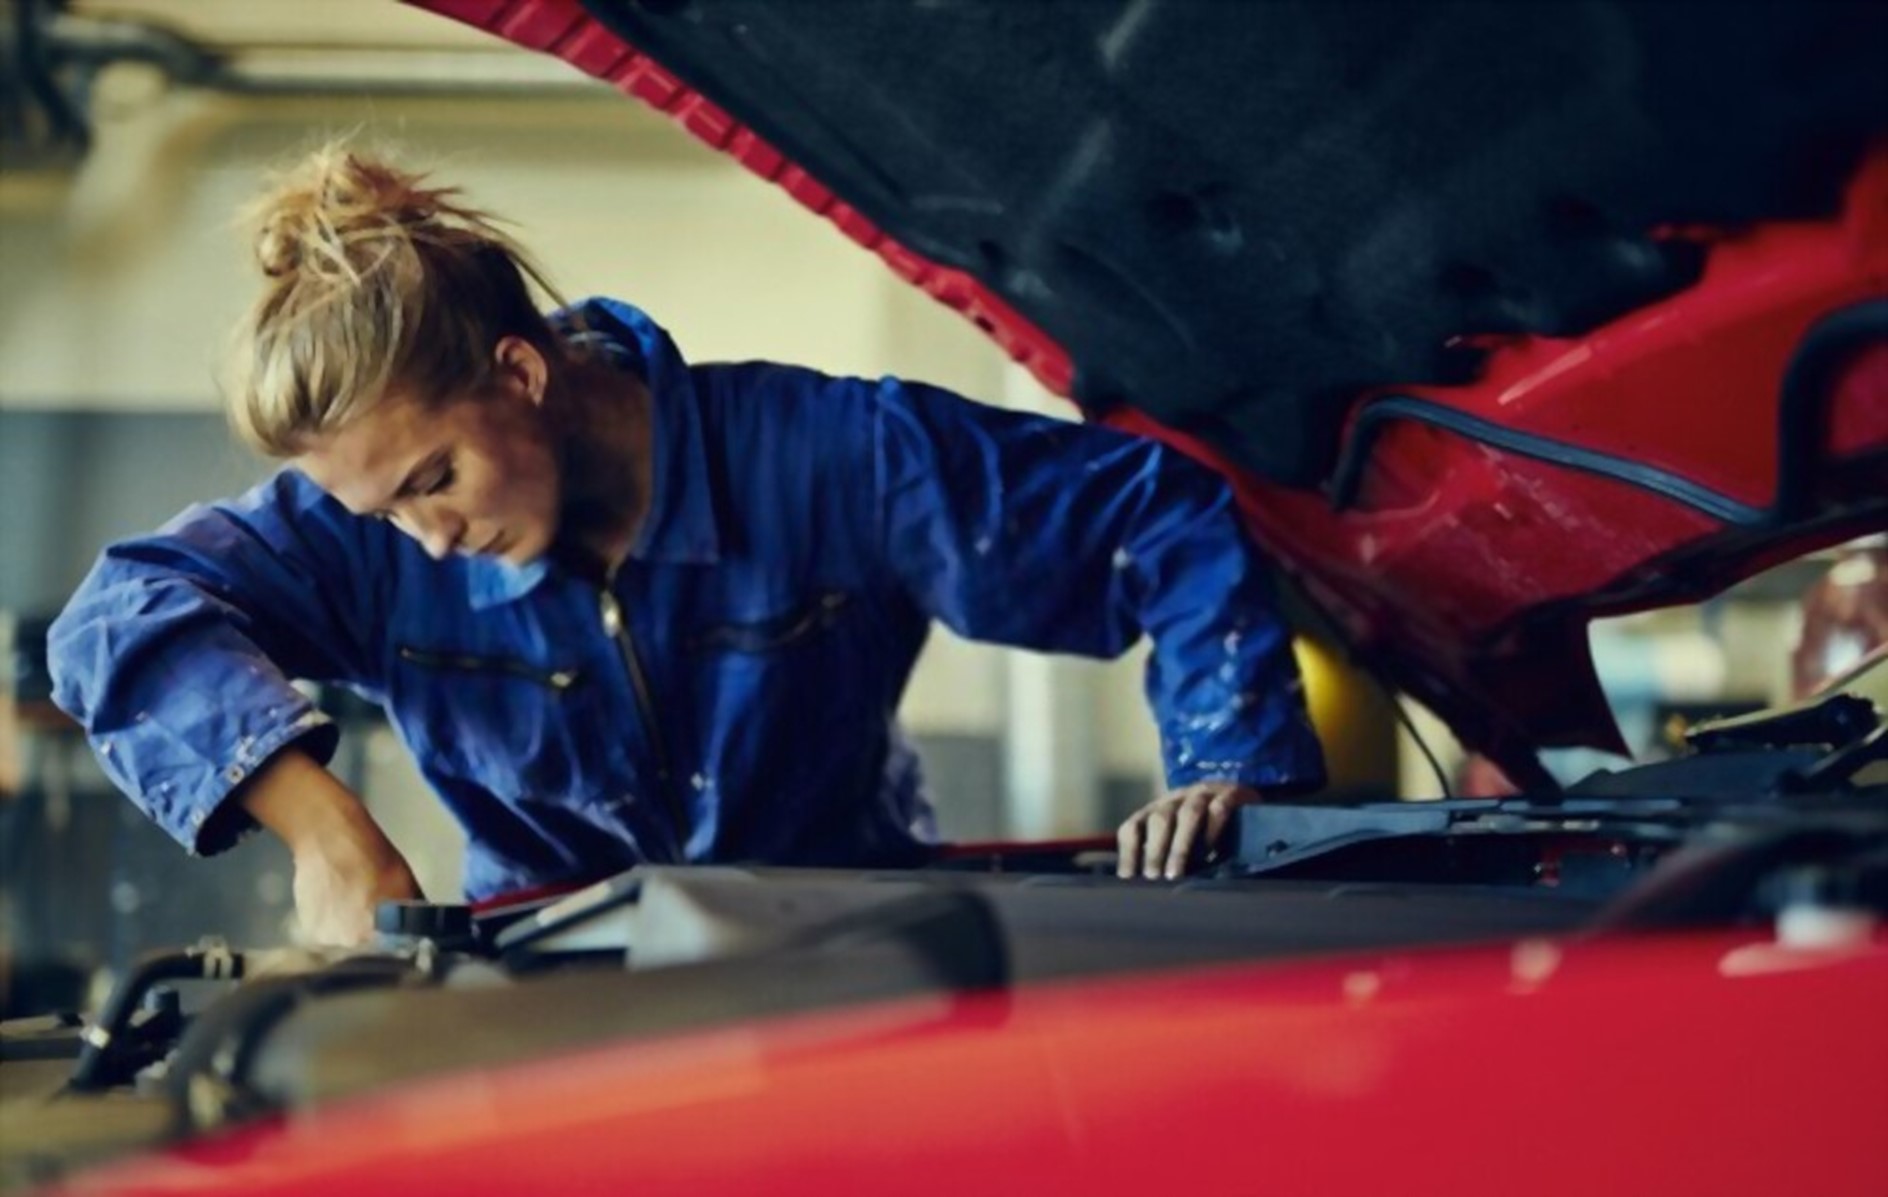 4 Ways To Get Your Car Serviced By A Mechanic The Right Way